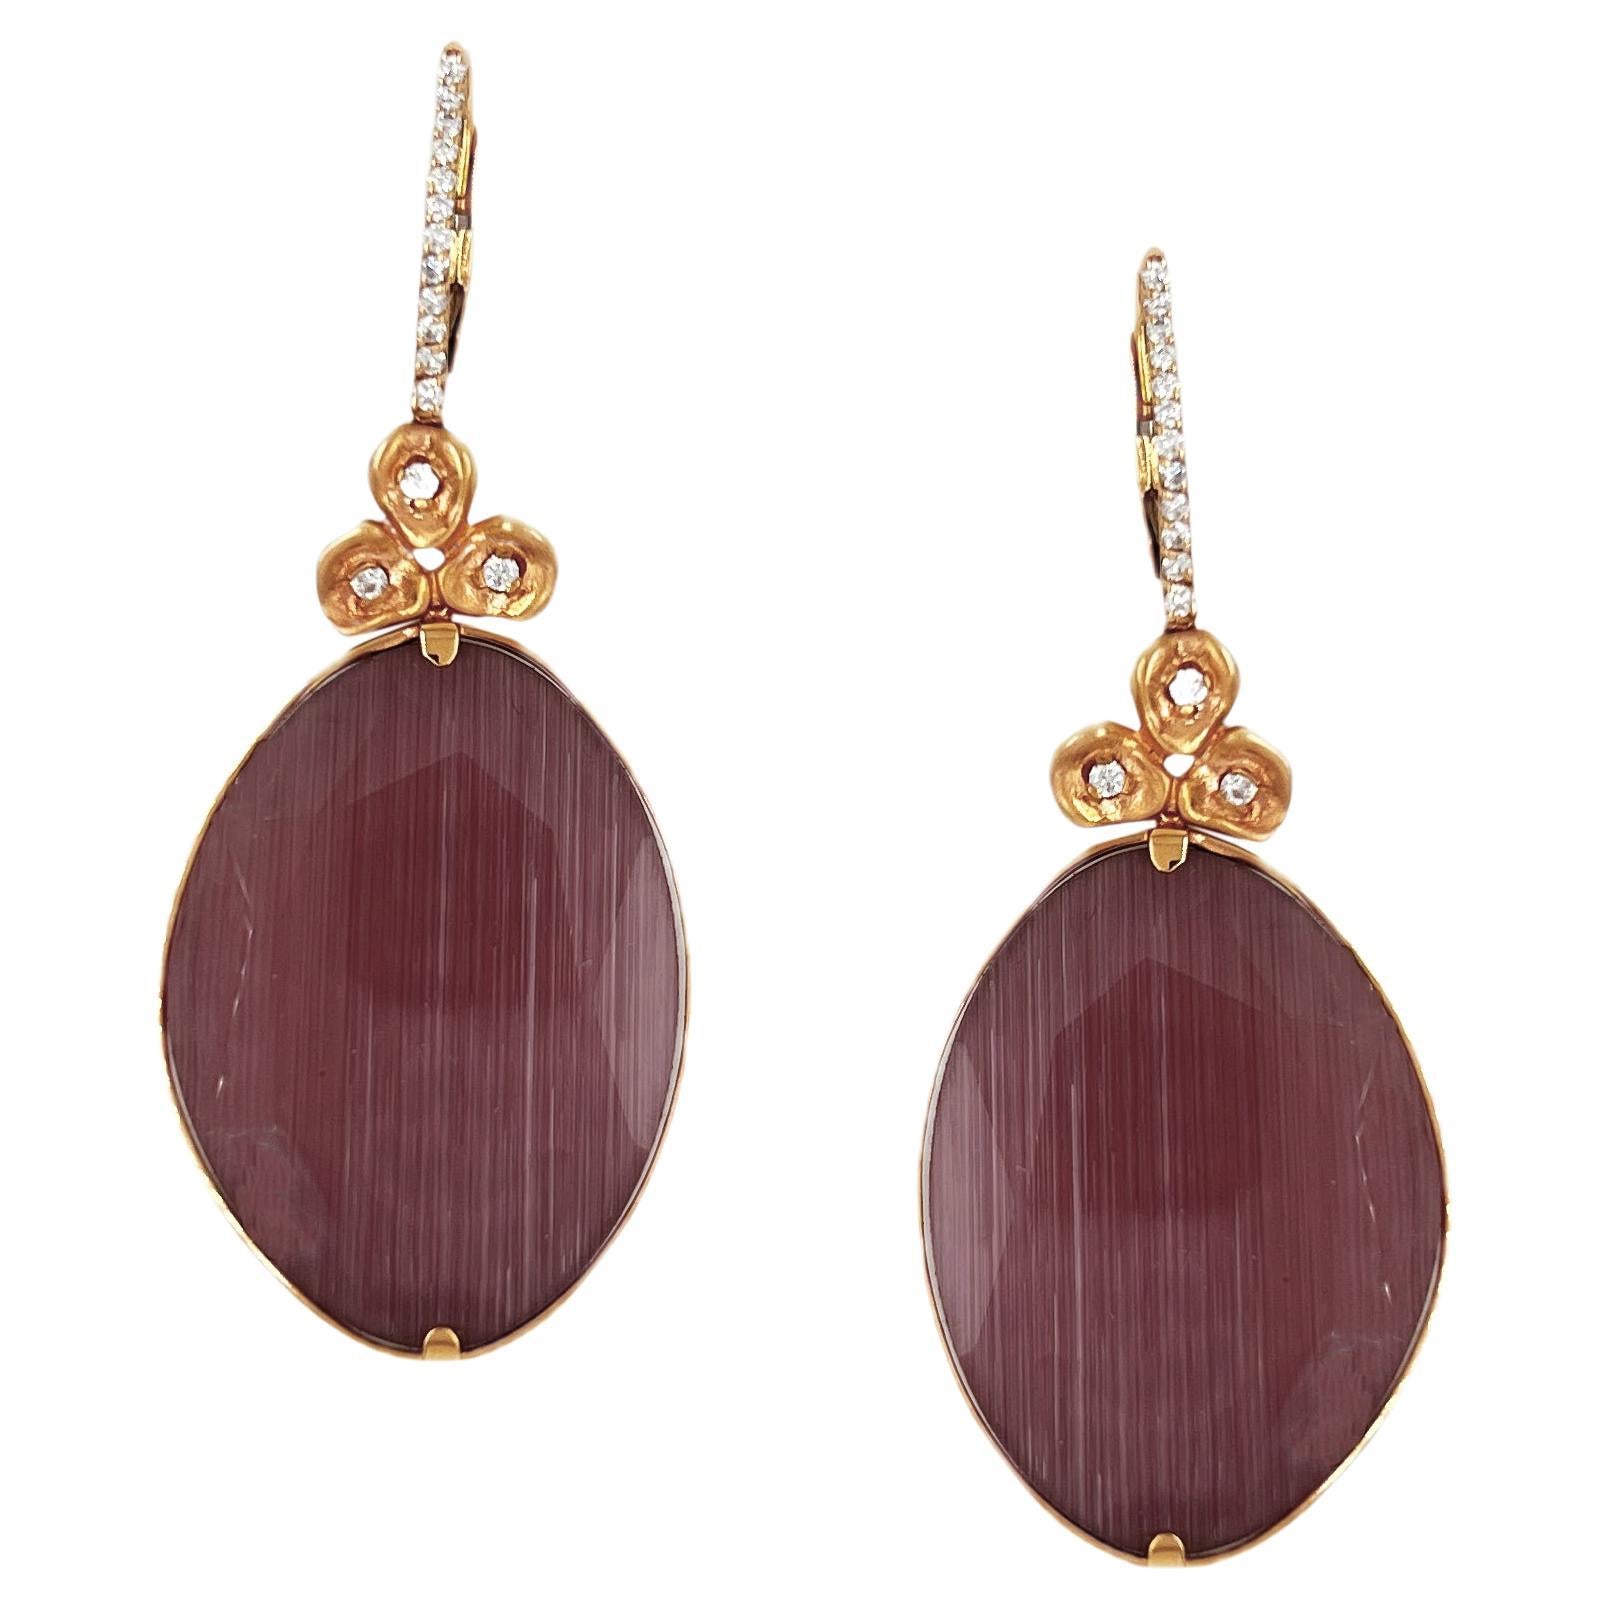 Earrings Doublets (rock crystal & fiber) in 18K gold, and diamonds For Sale